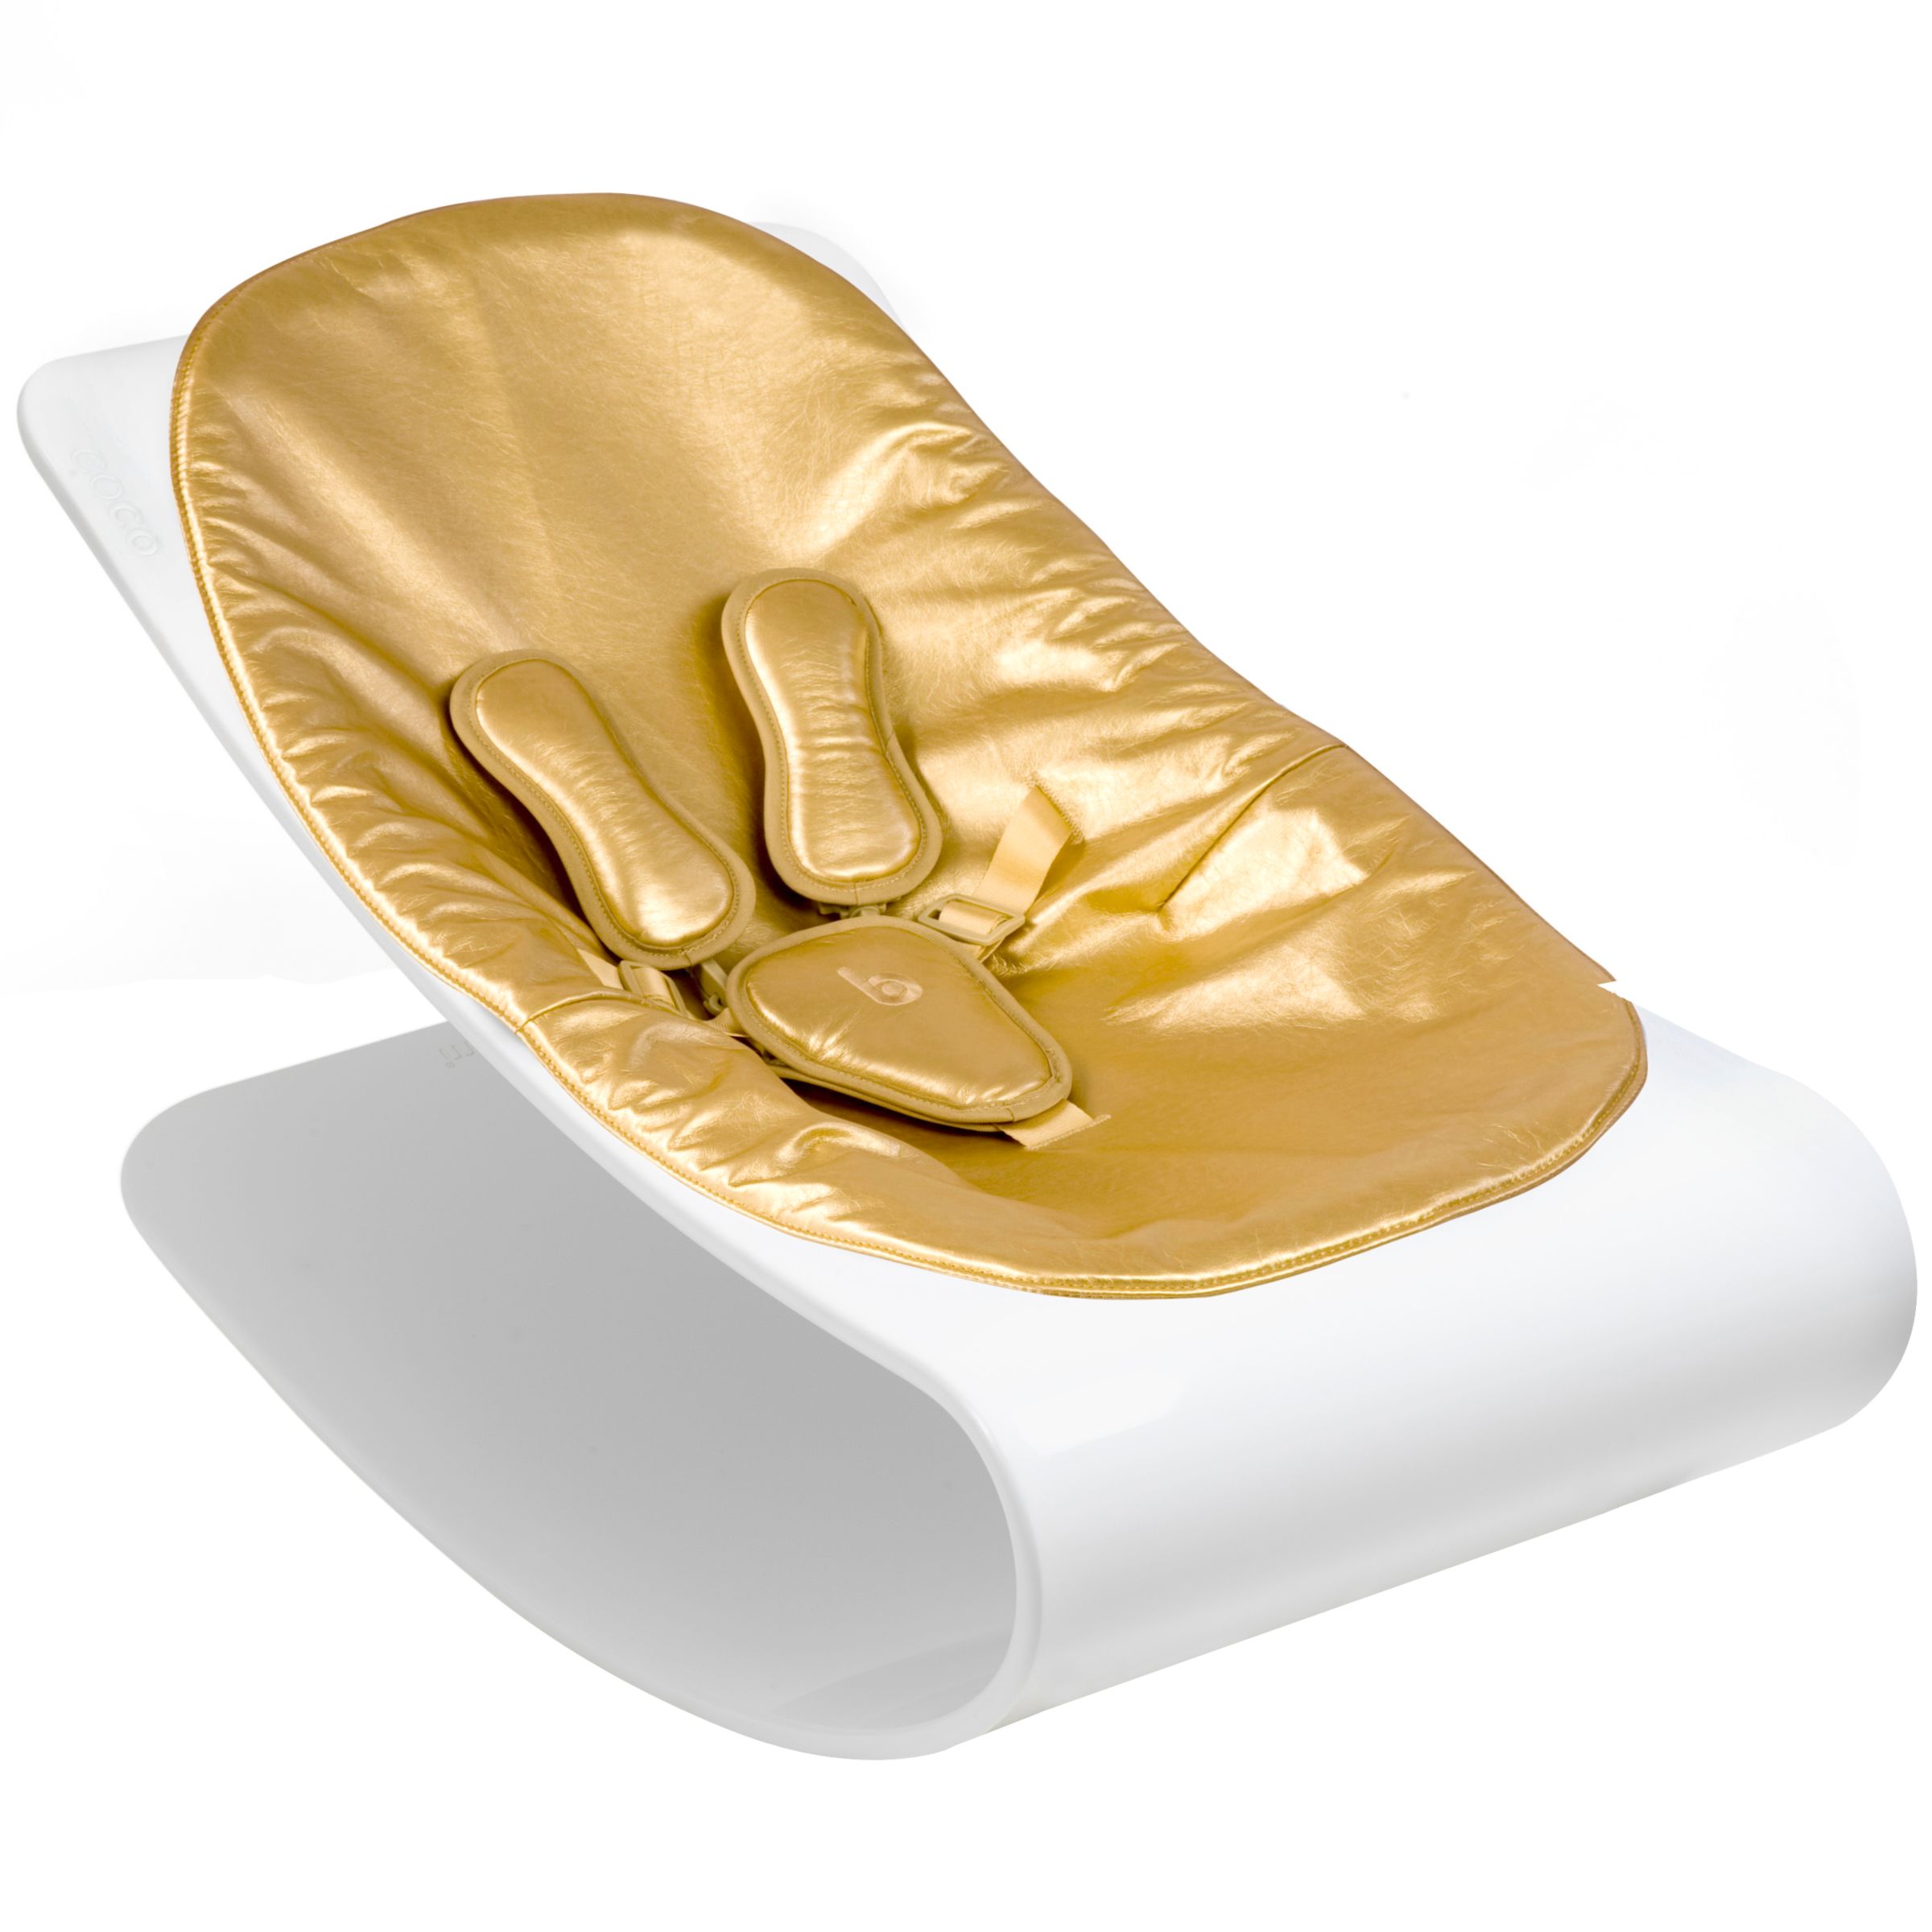 bloom Coco Plexistyle Baby Lounger, Ivory White with Solar Gold at John Lewis